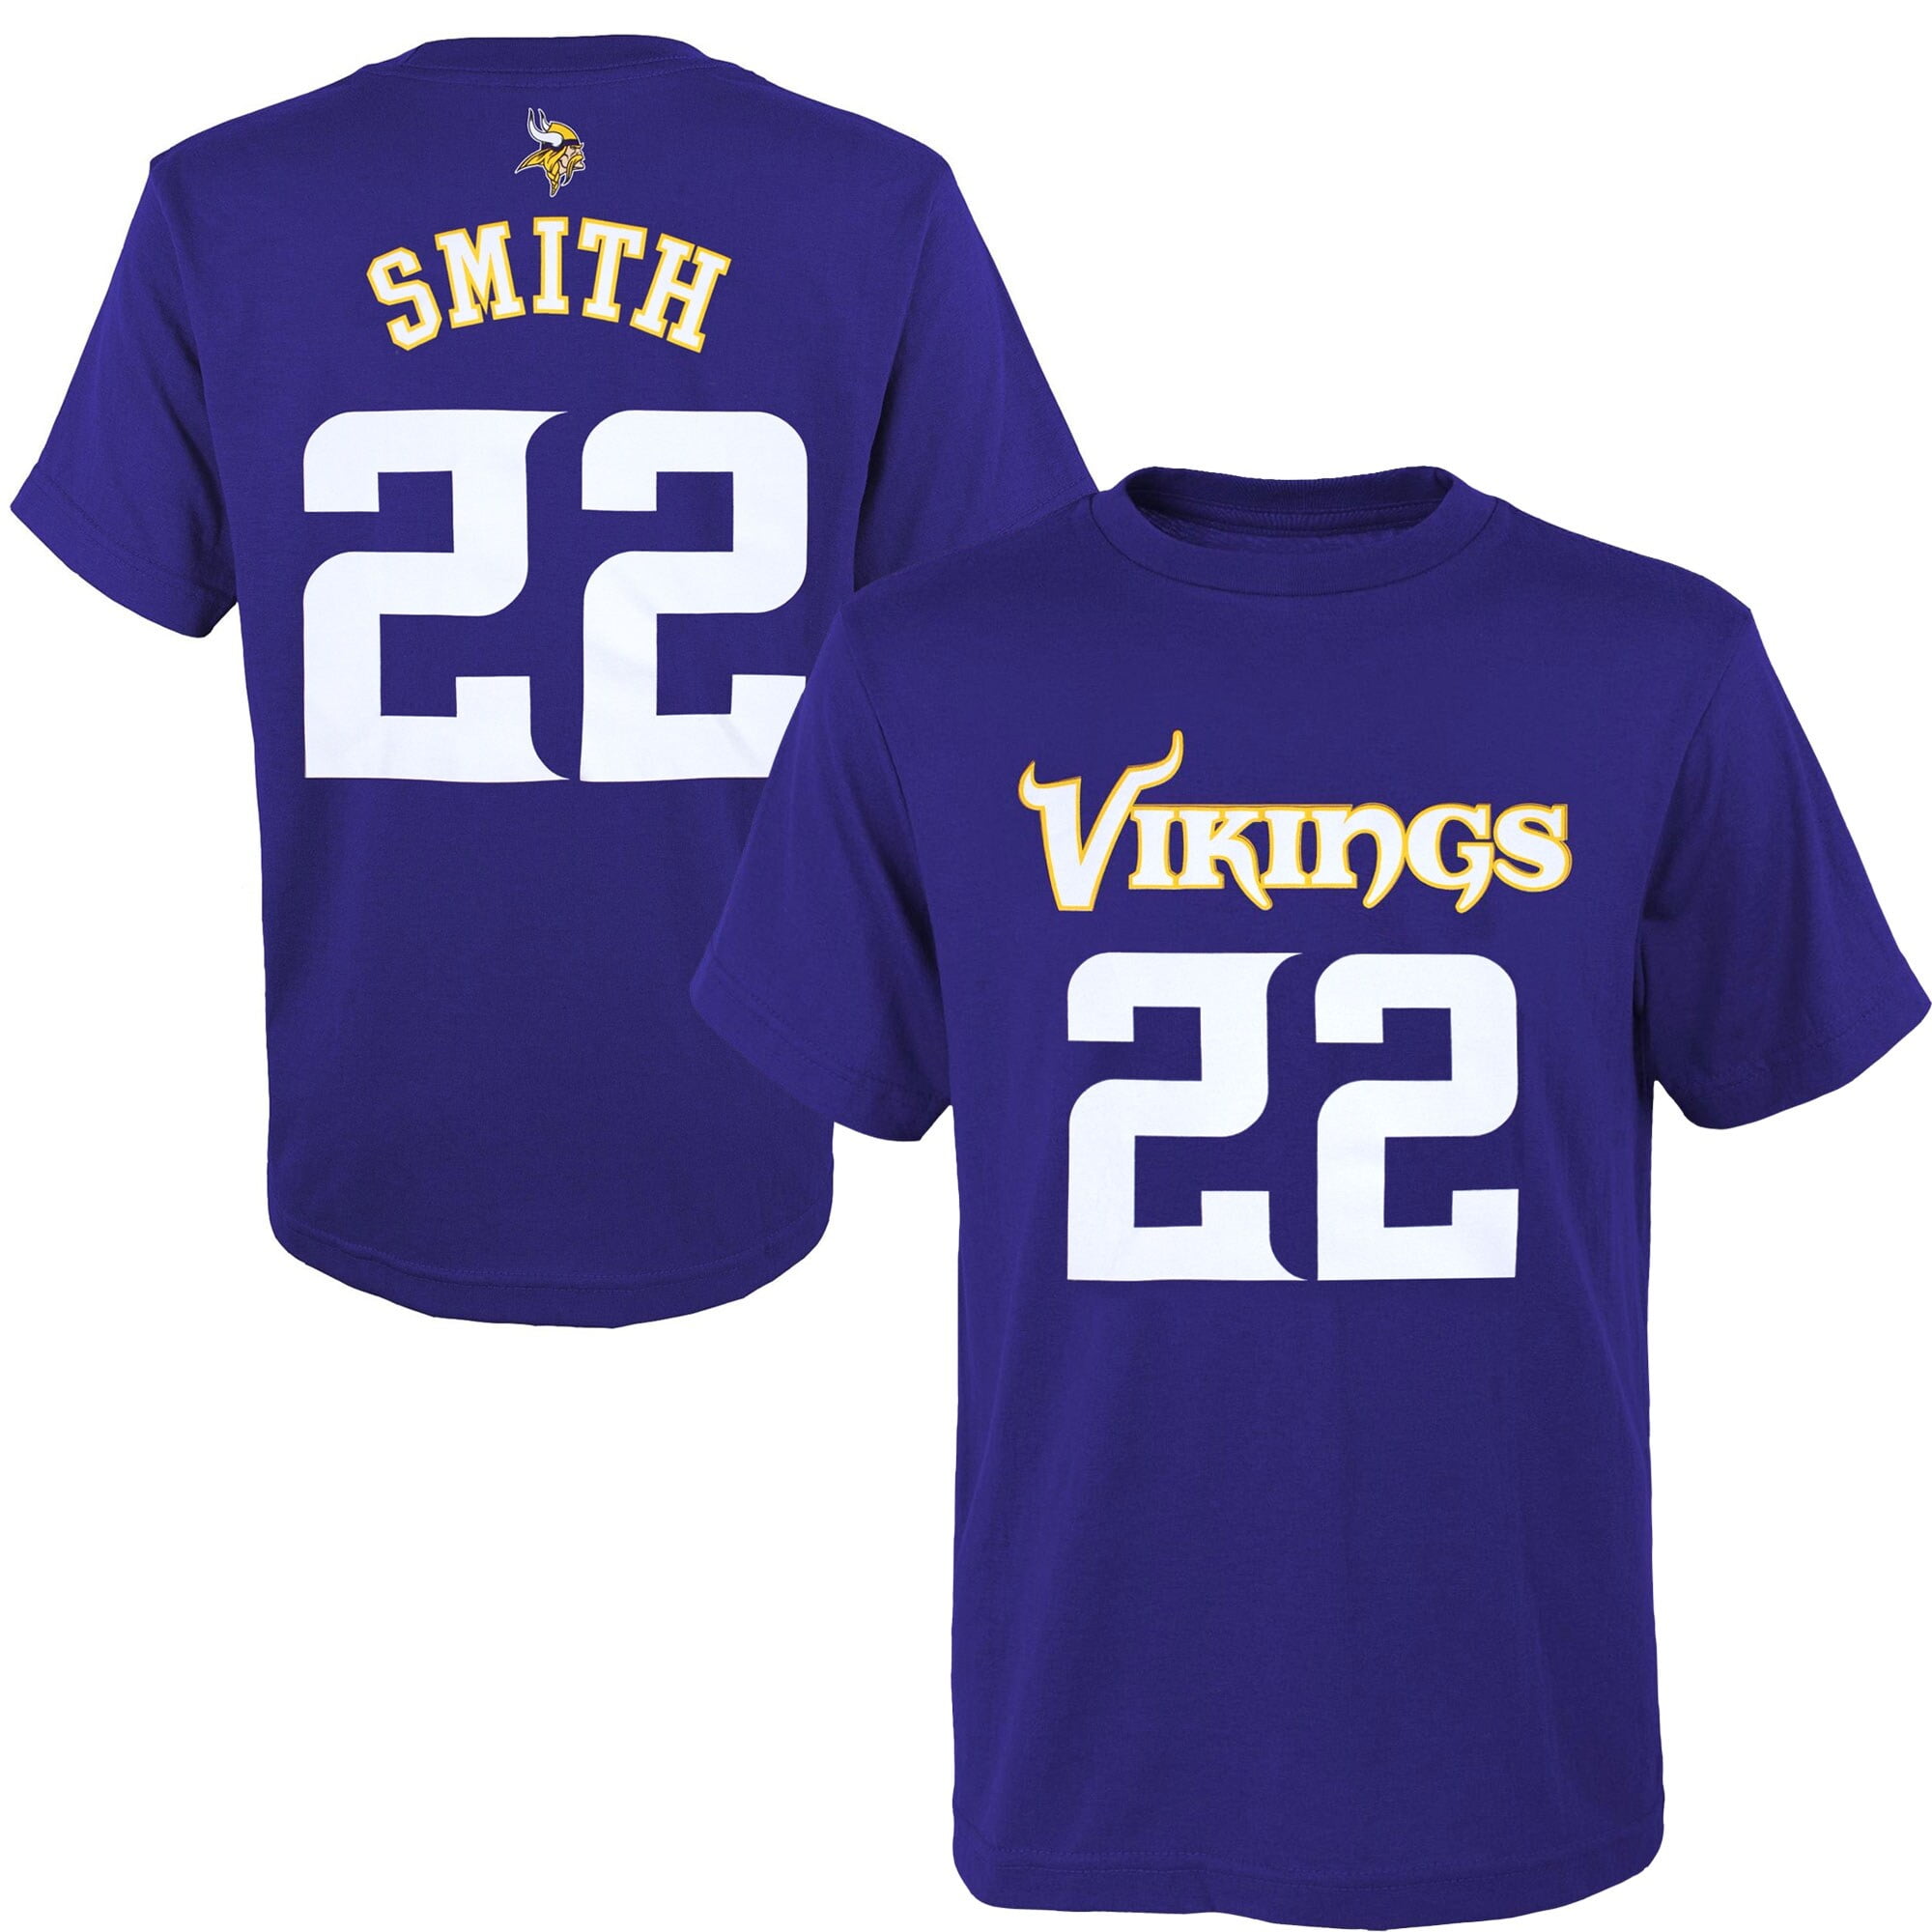 harrison smith youth jersey